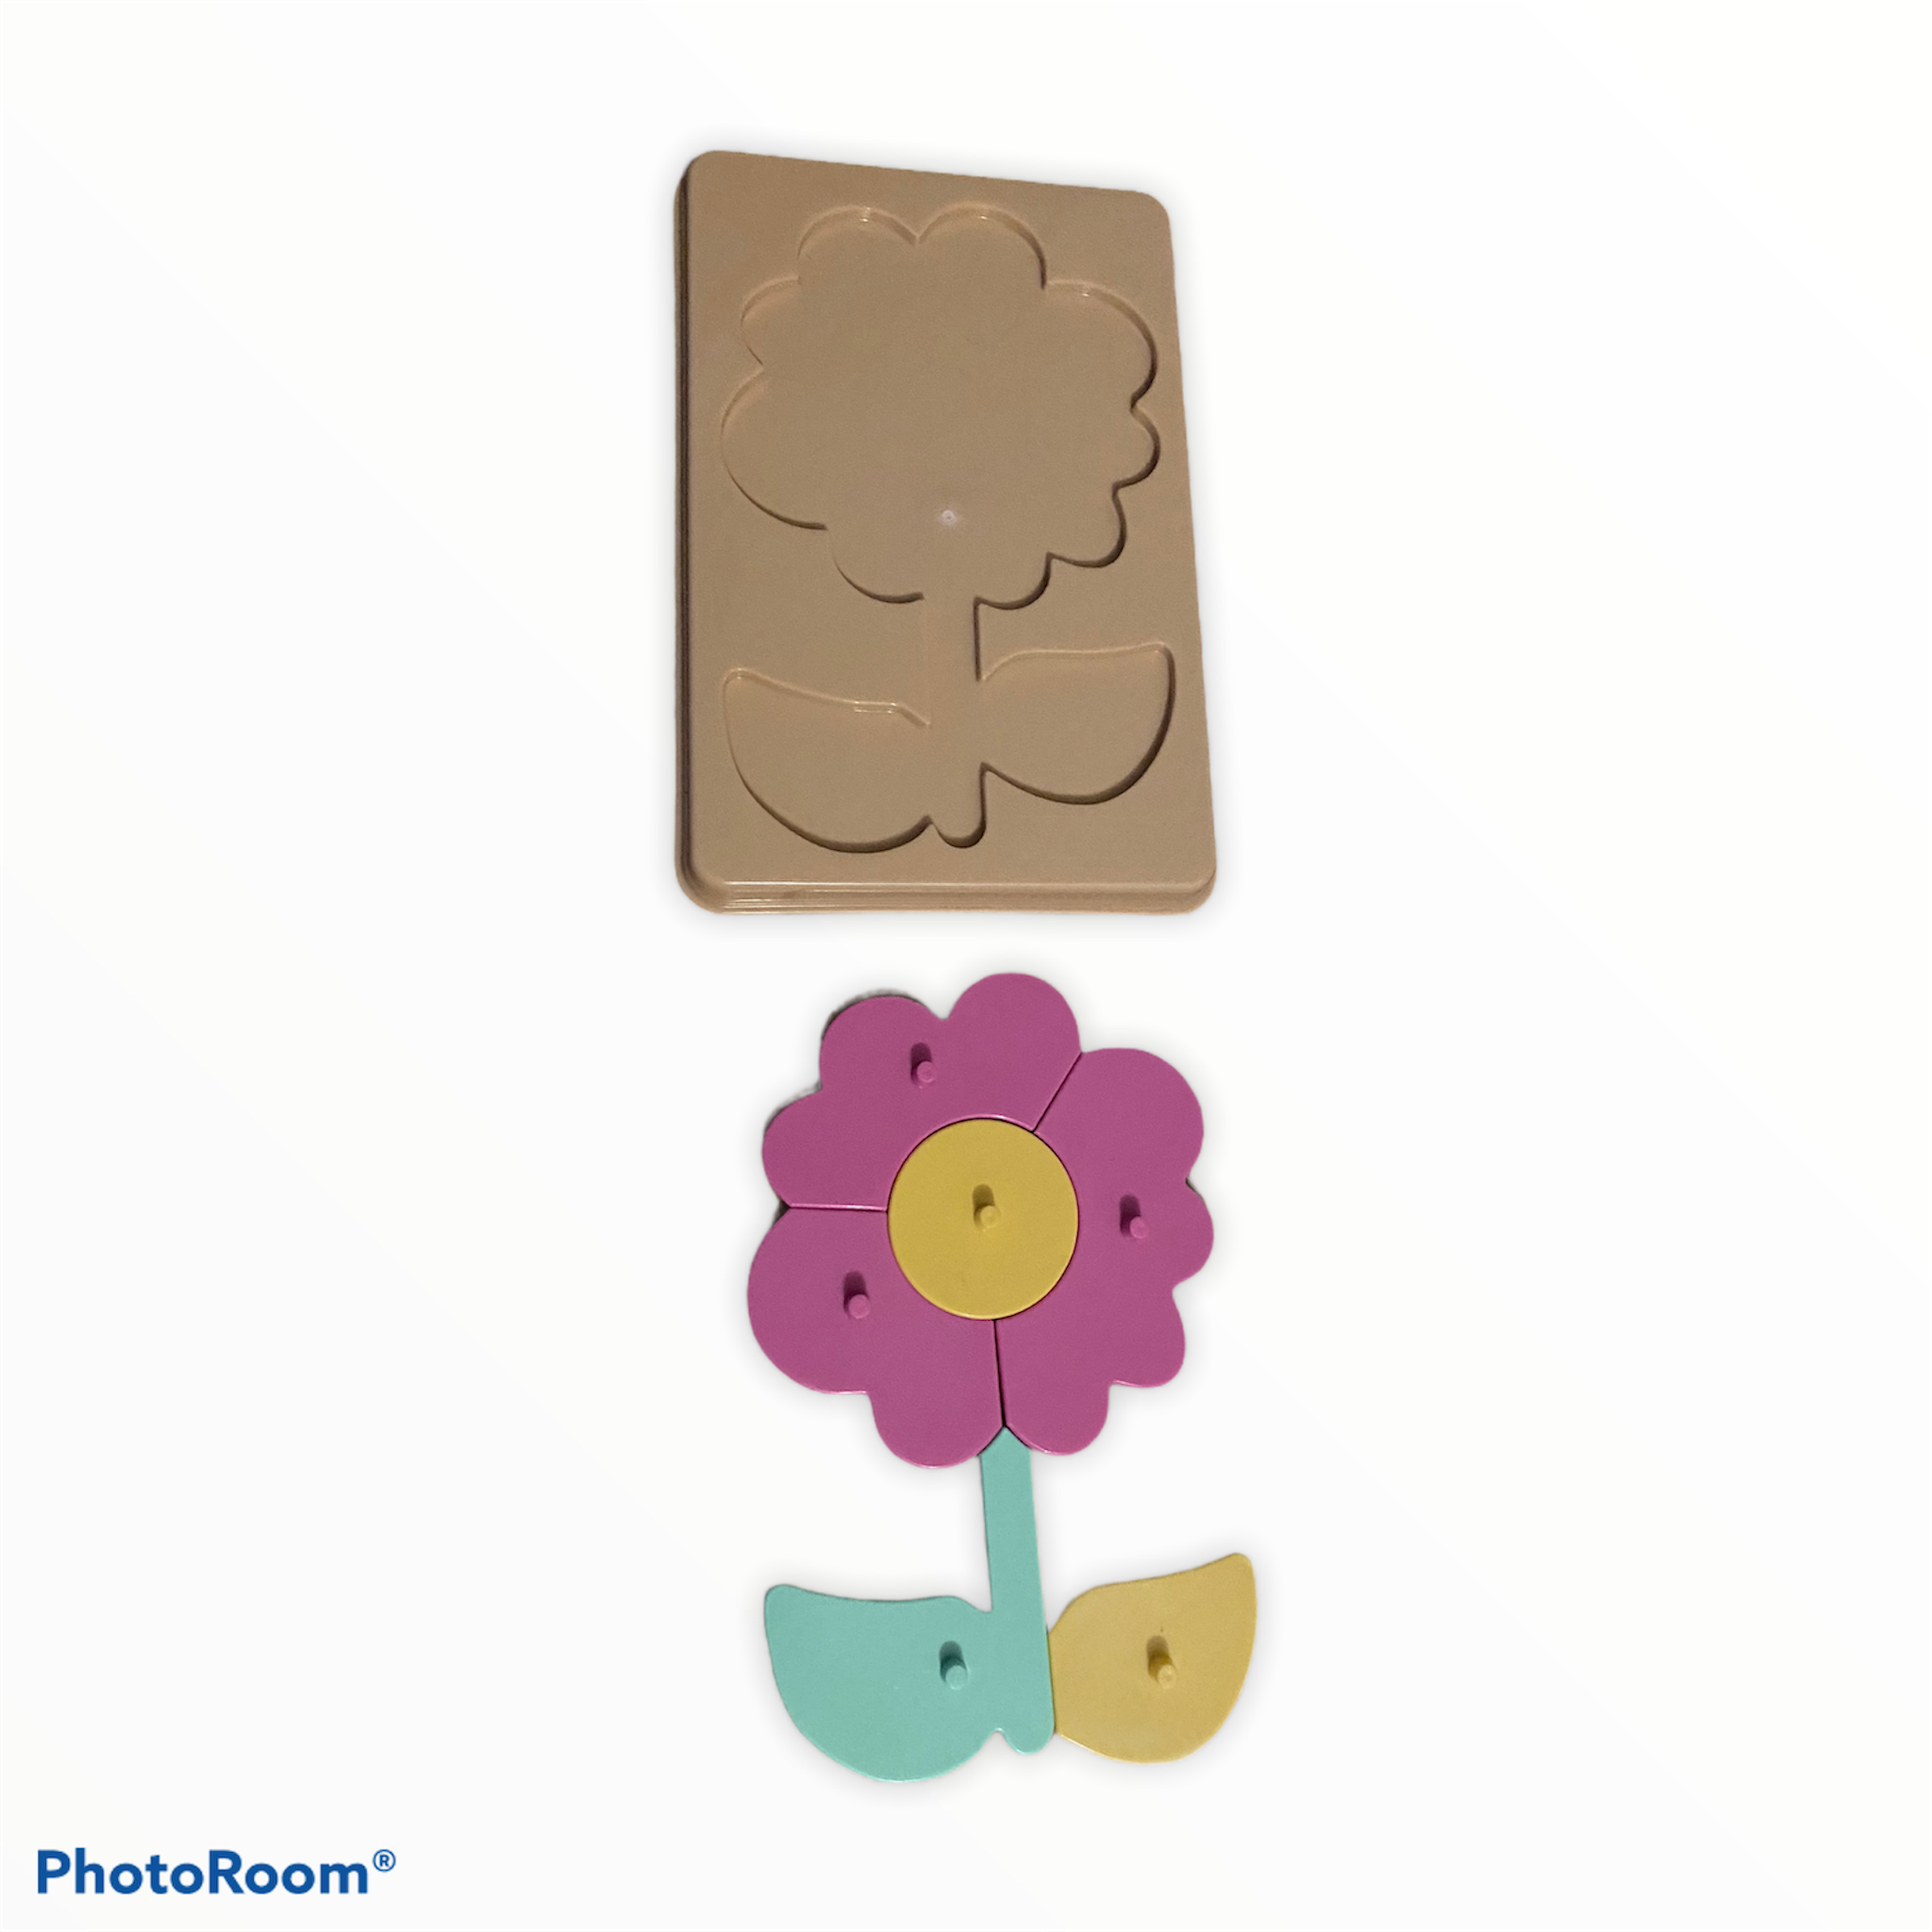 Bioplastic toys - Baby puzzle flower educational toy.